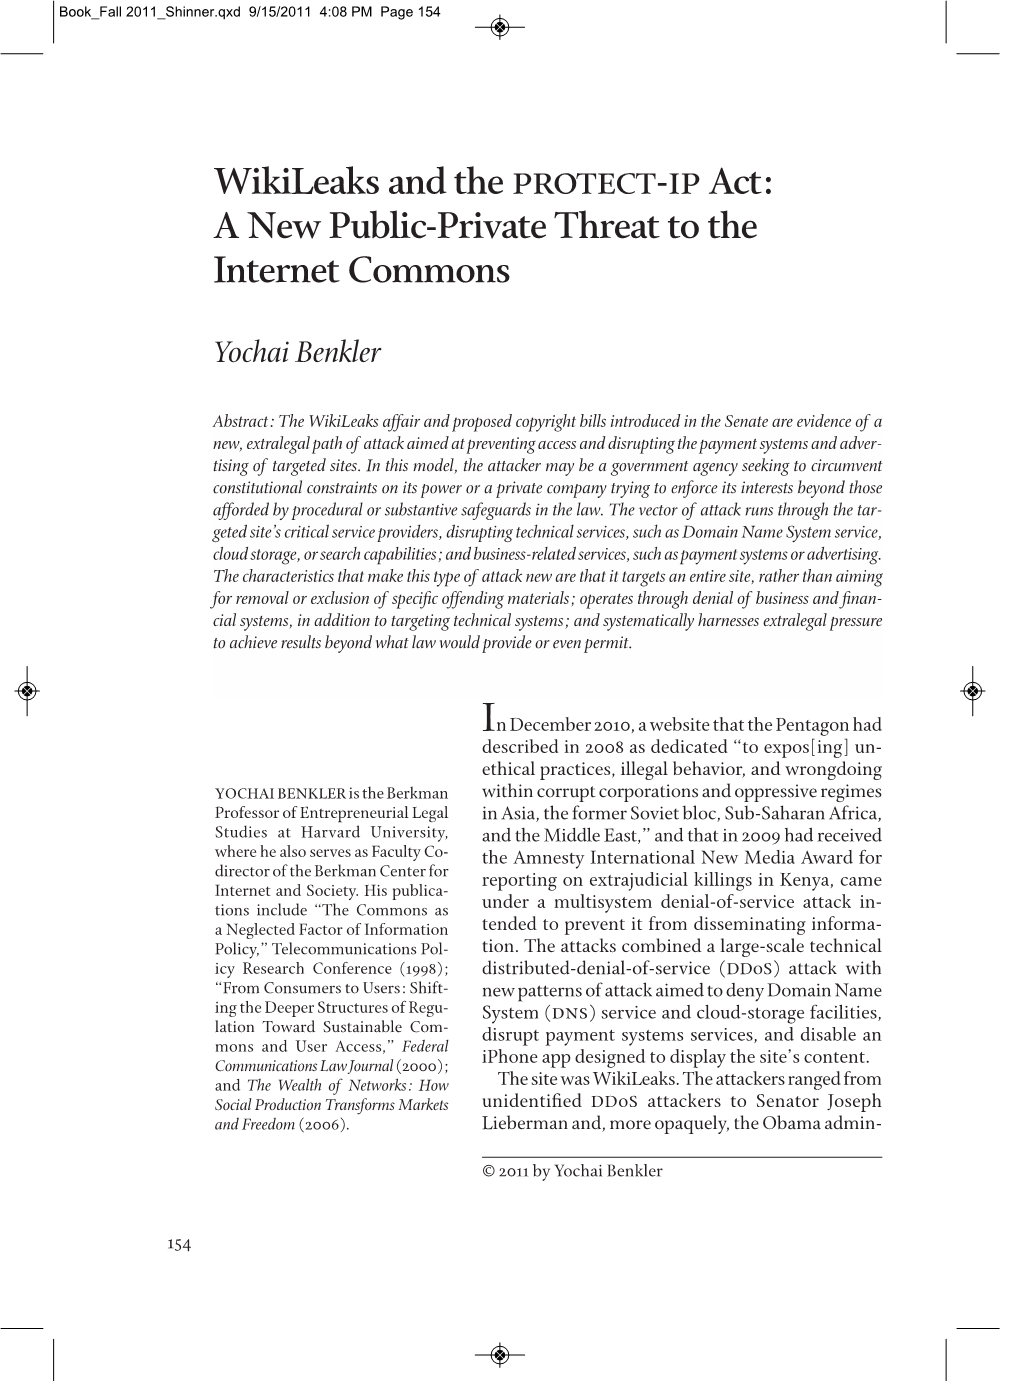 Wikileaks and the Protect-Ipact: a New Public-Private Threat to The